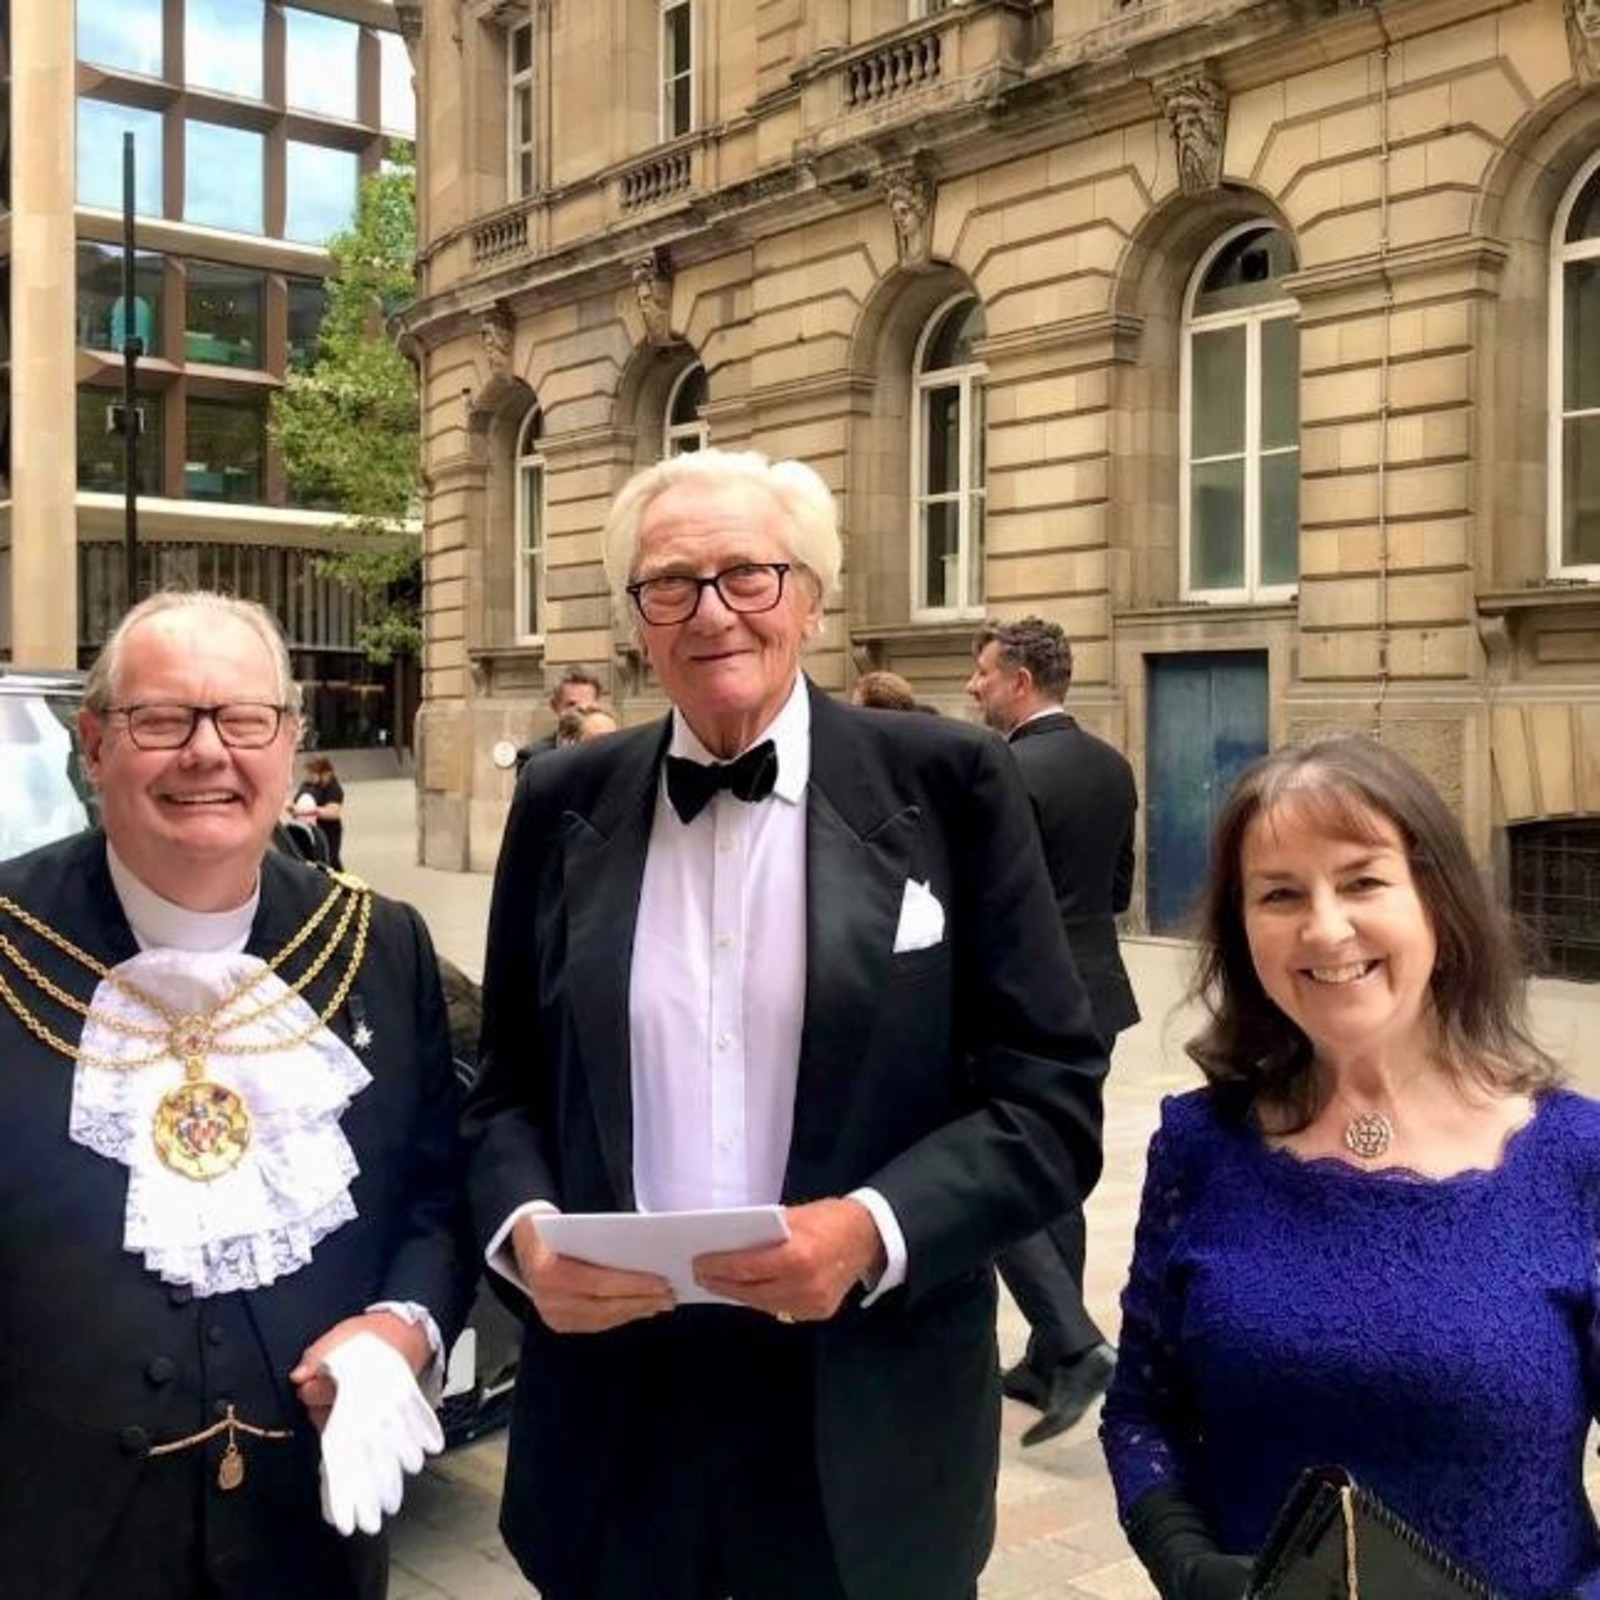 20 July 2023 - At the Marketor’s Civic Dinner, my mother company, great to meet up again with Lord Michael Heseltine who I admitted as an Honorary Freeman when I was Master in 2015.